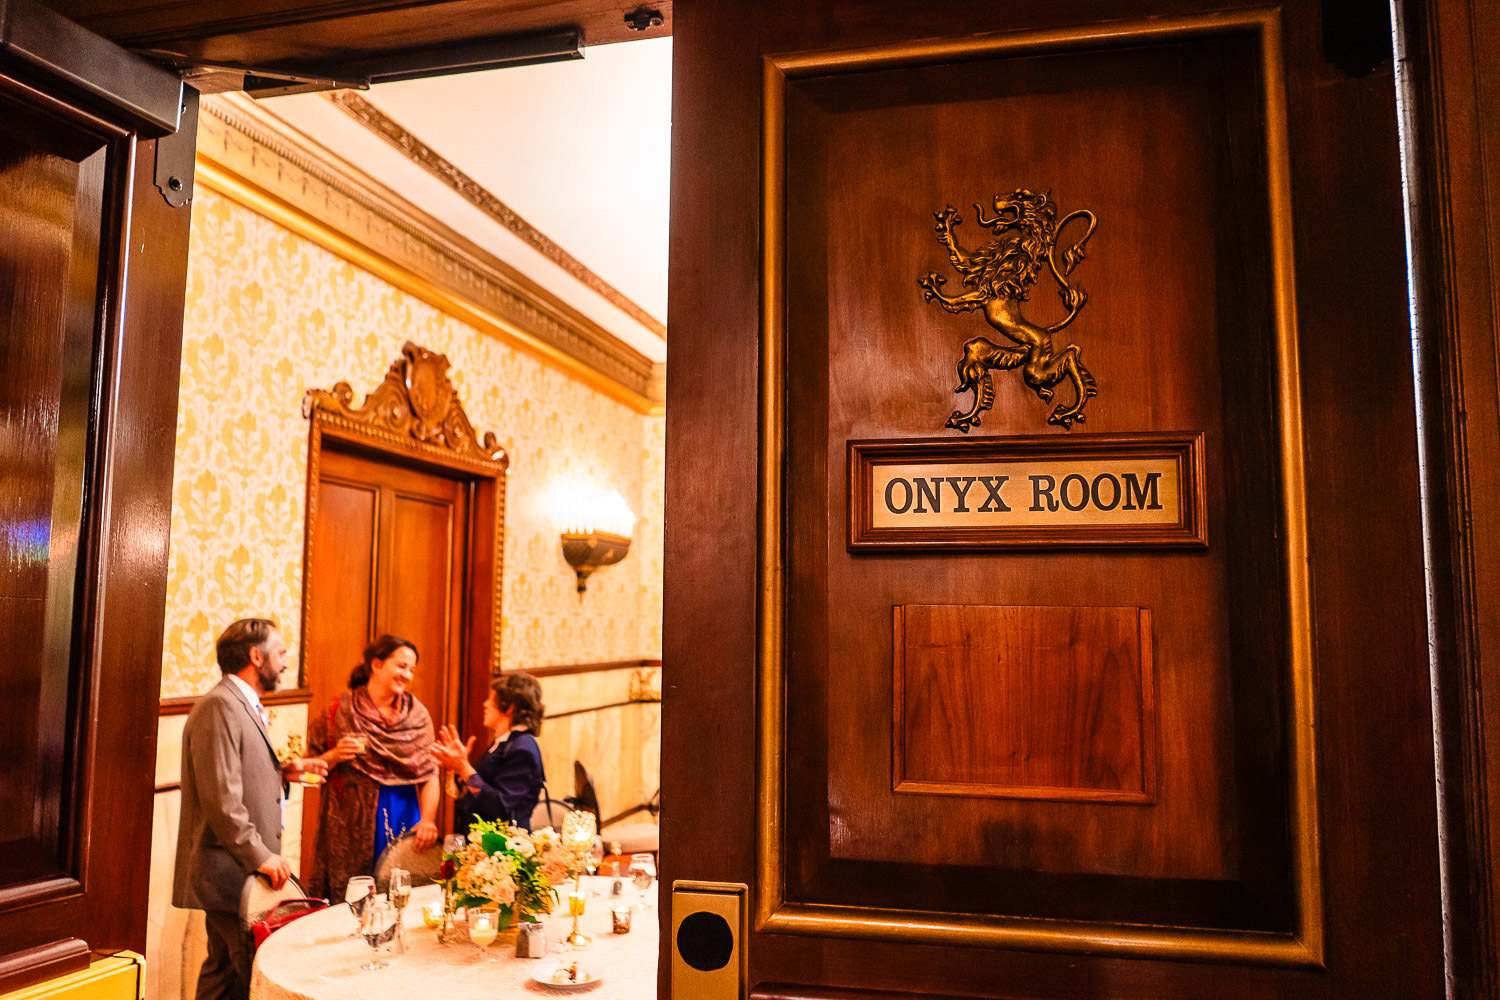 Elegant dining scene inside the Onyx Room of the Brown Palace with guests engaged in conversation.